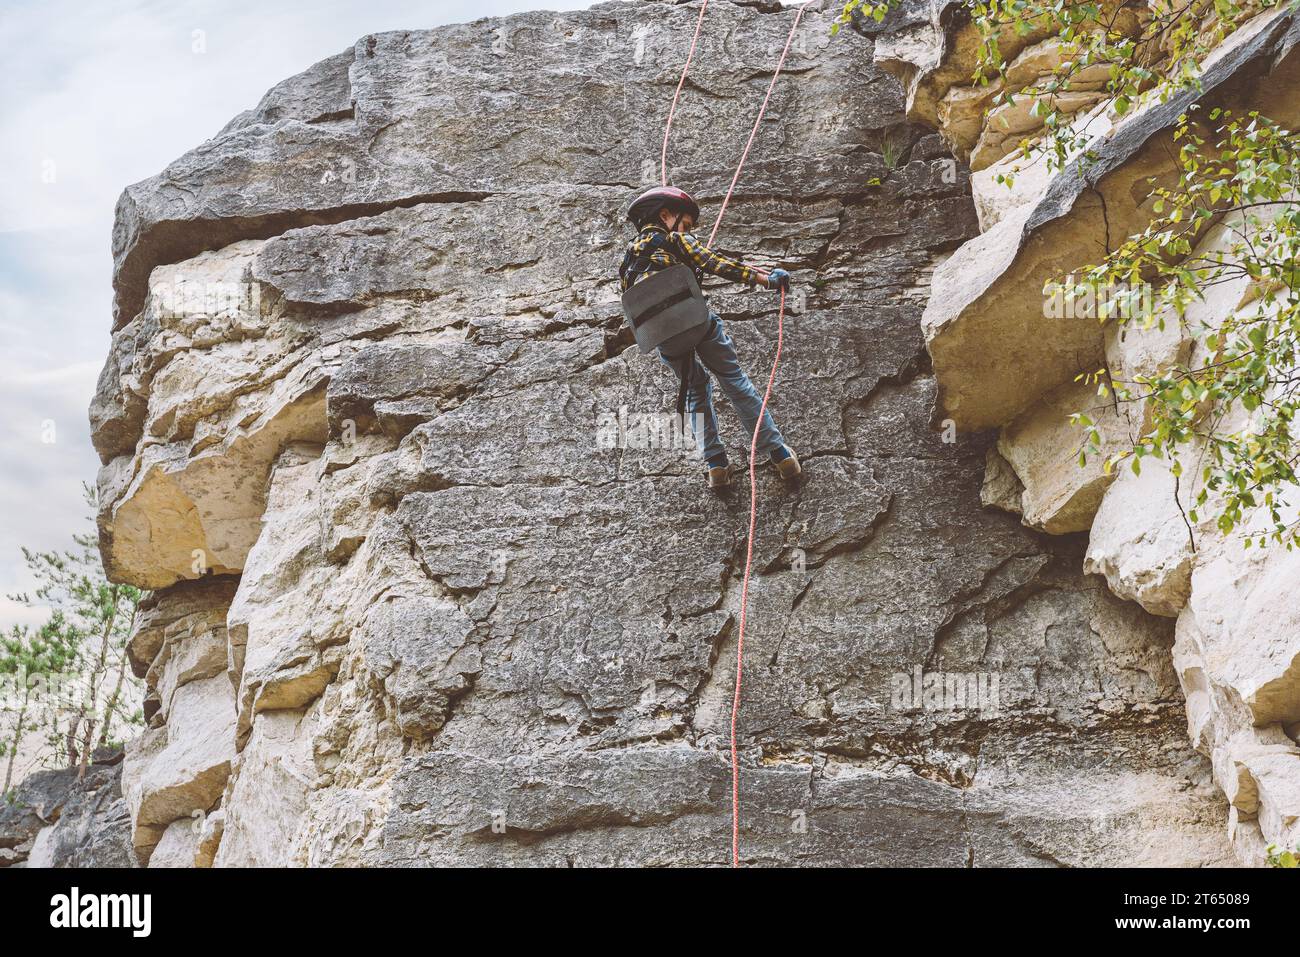 Small kid at rock climbing training learning basics of abseiling Stock Photo